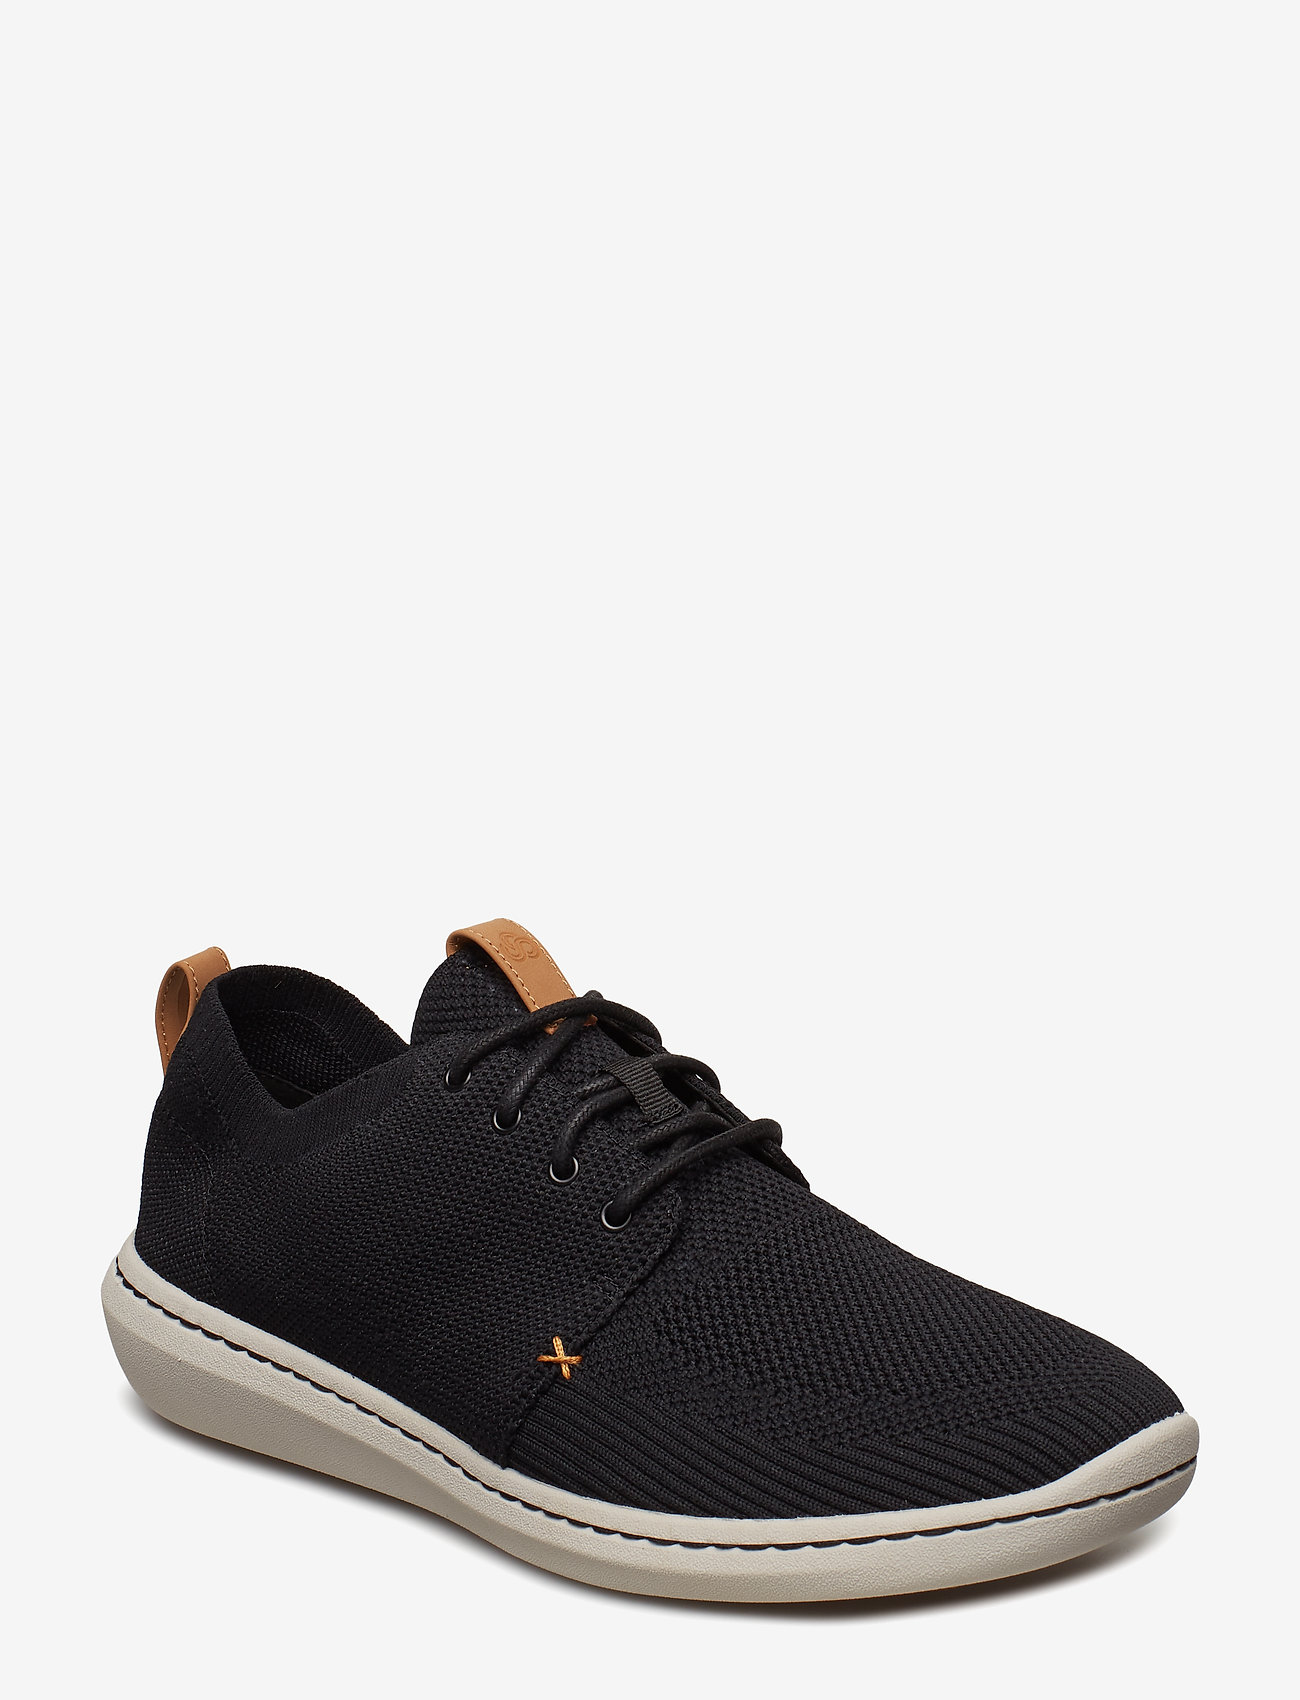 Clarks - Step Urban Mix G - laag sneakers - 1001 black - 0